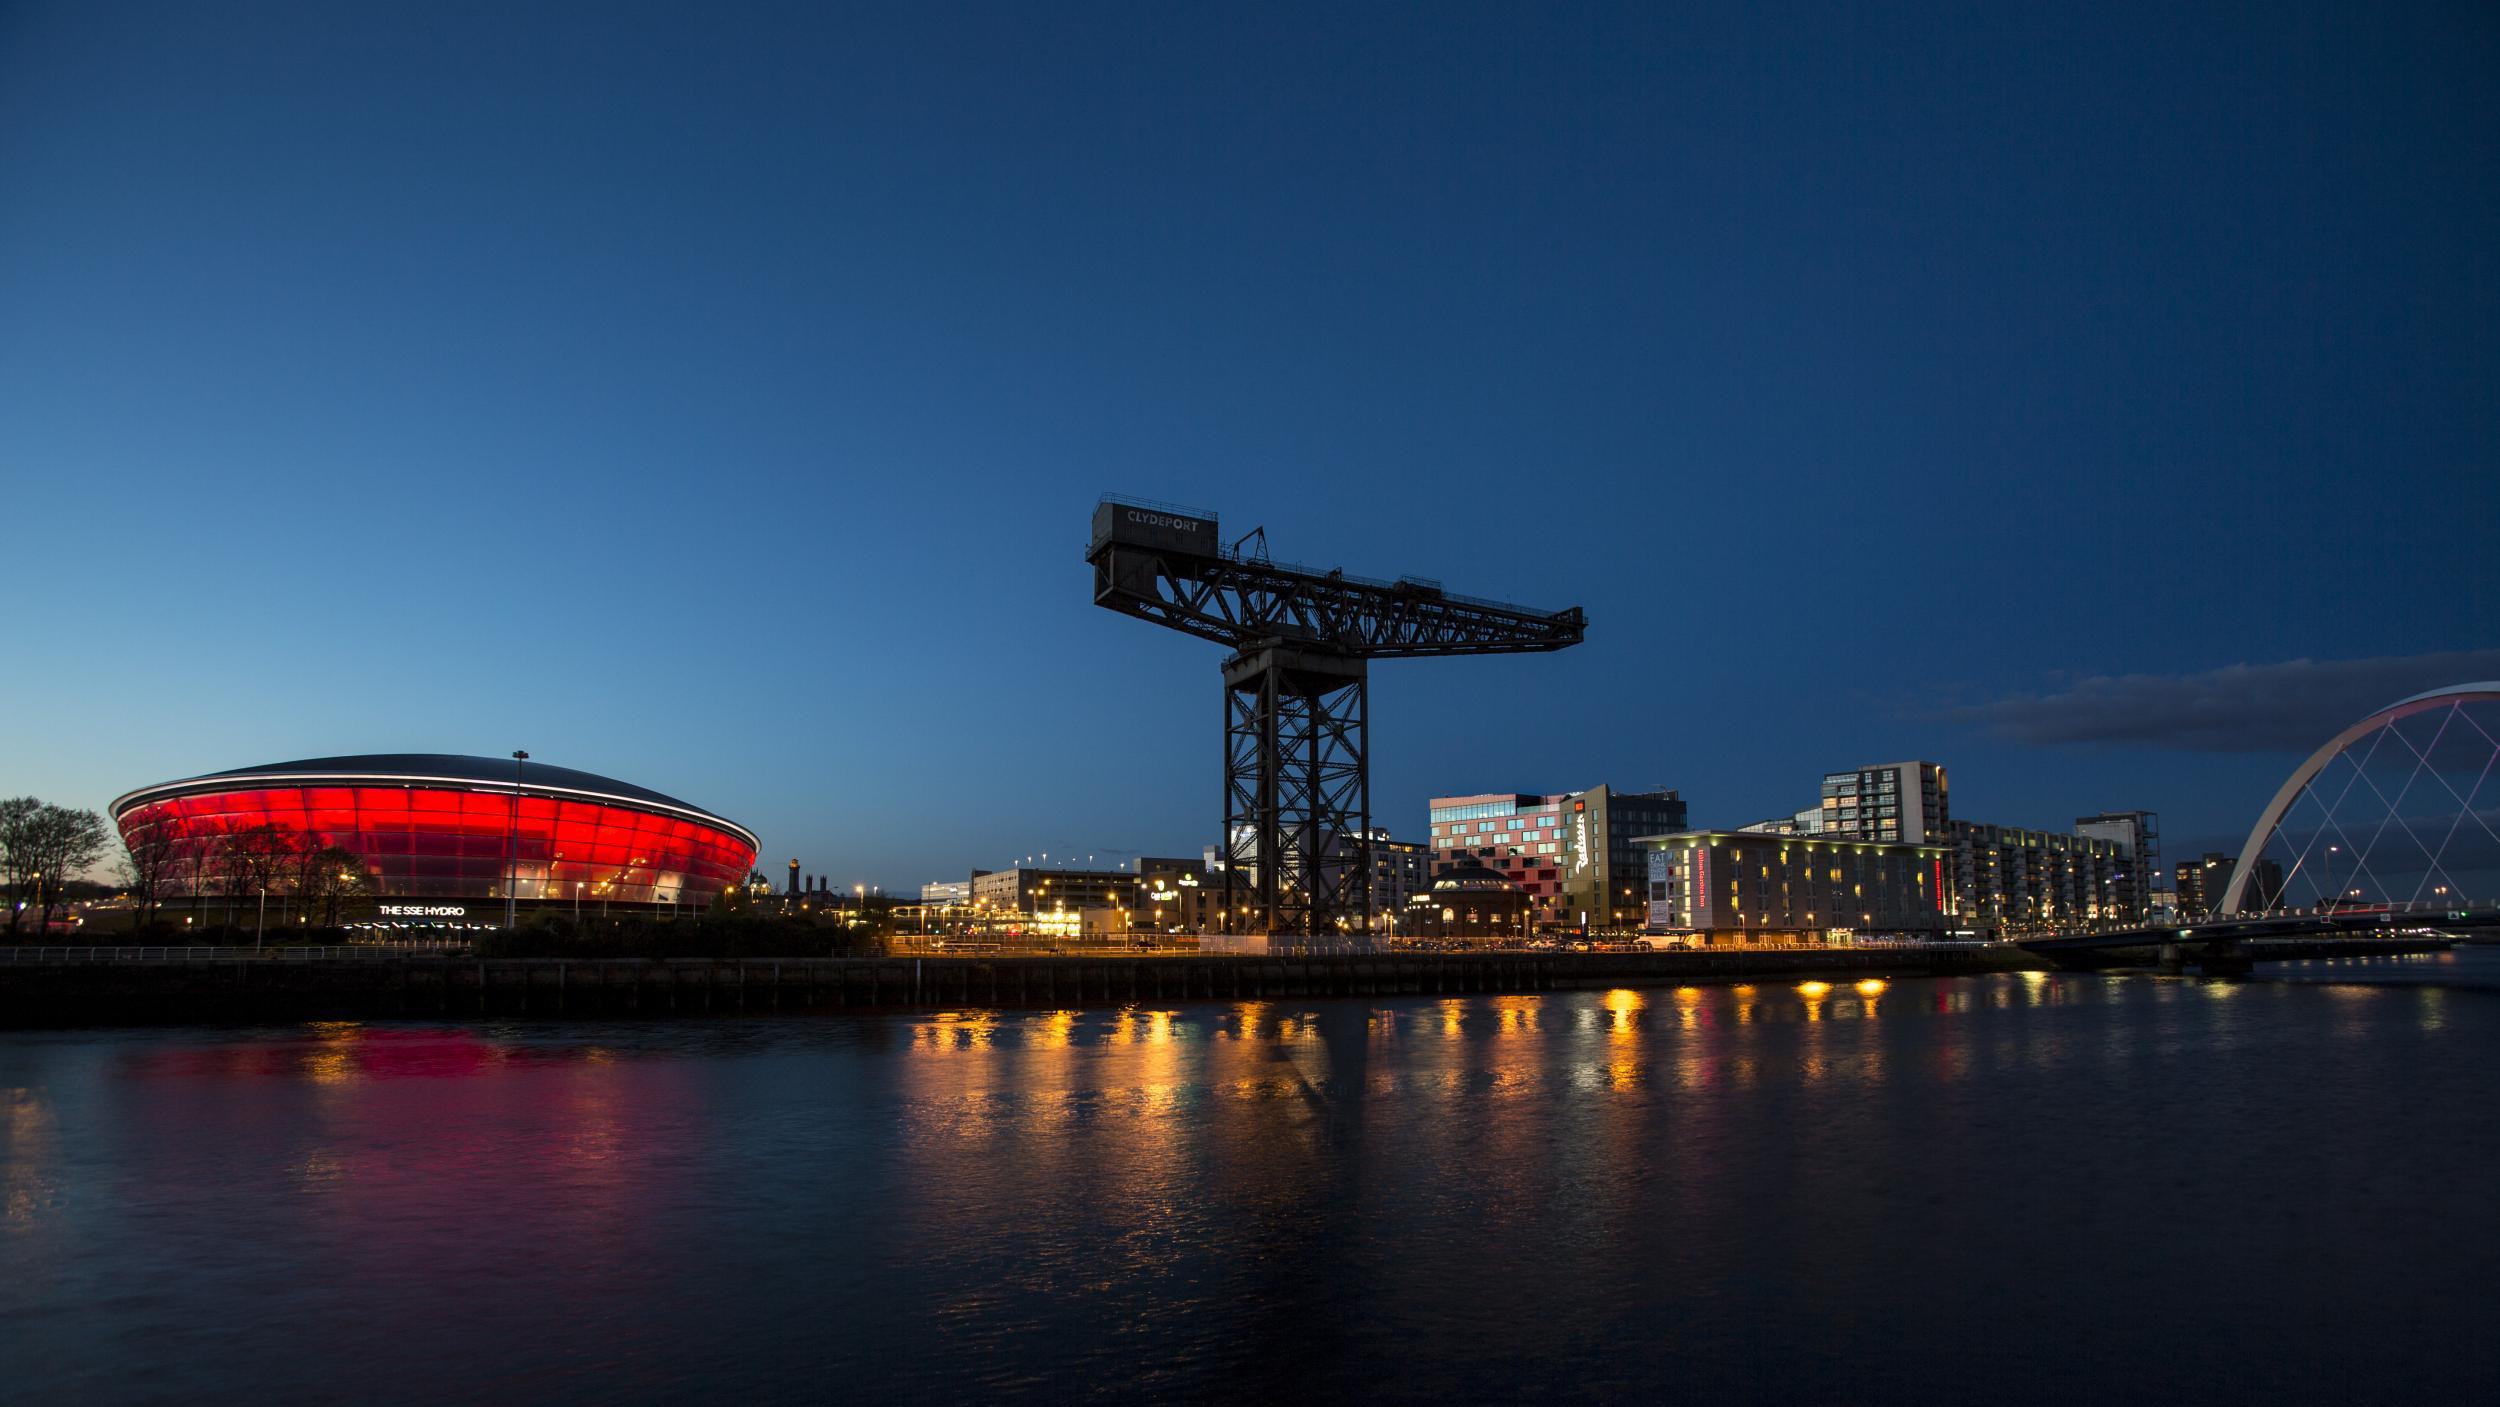 A new music venue put Finnieston, Glasgow on the map